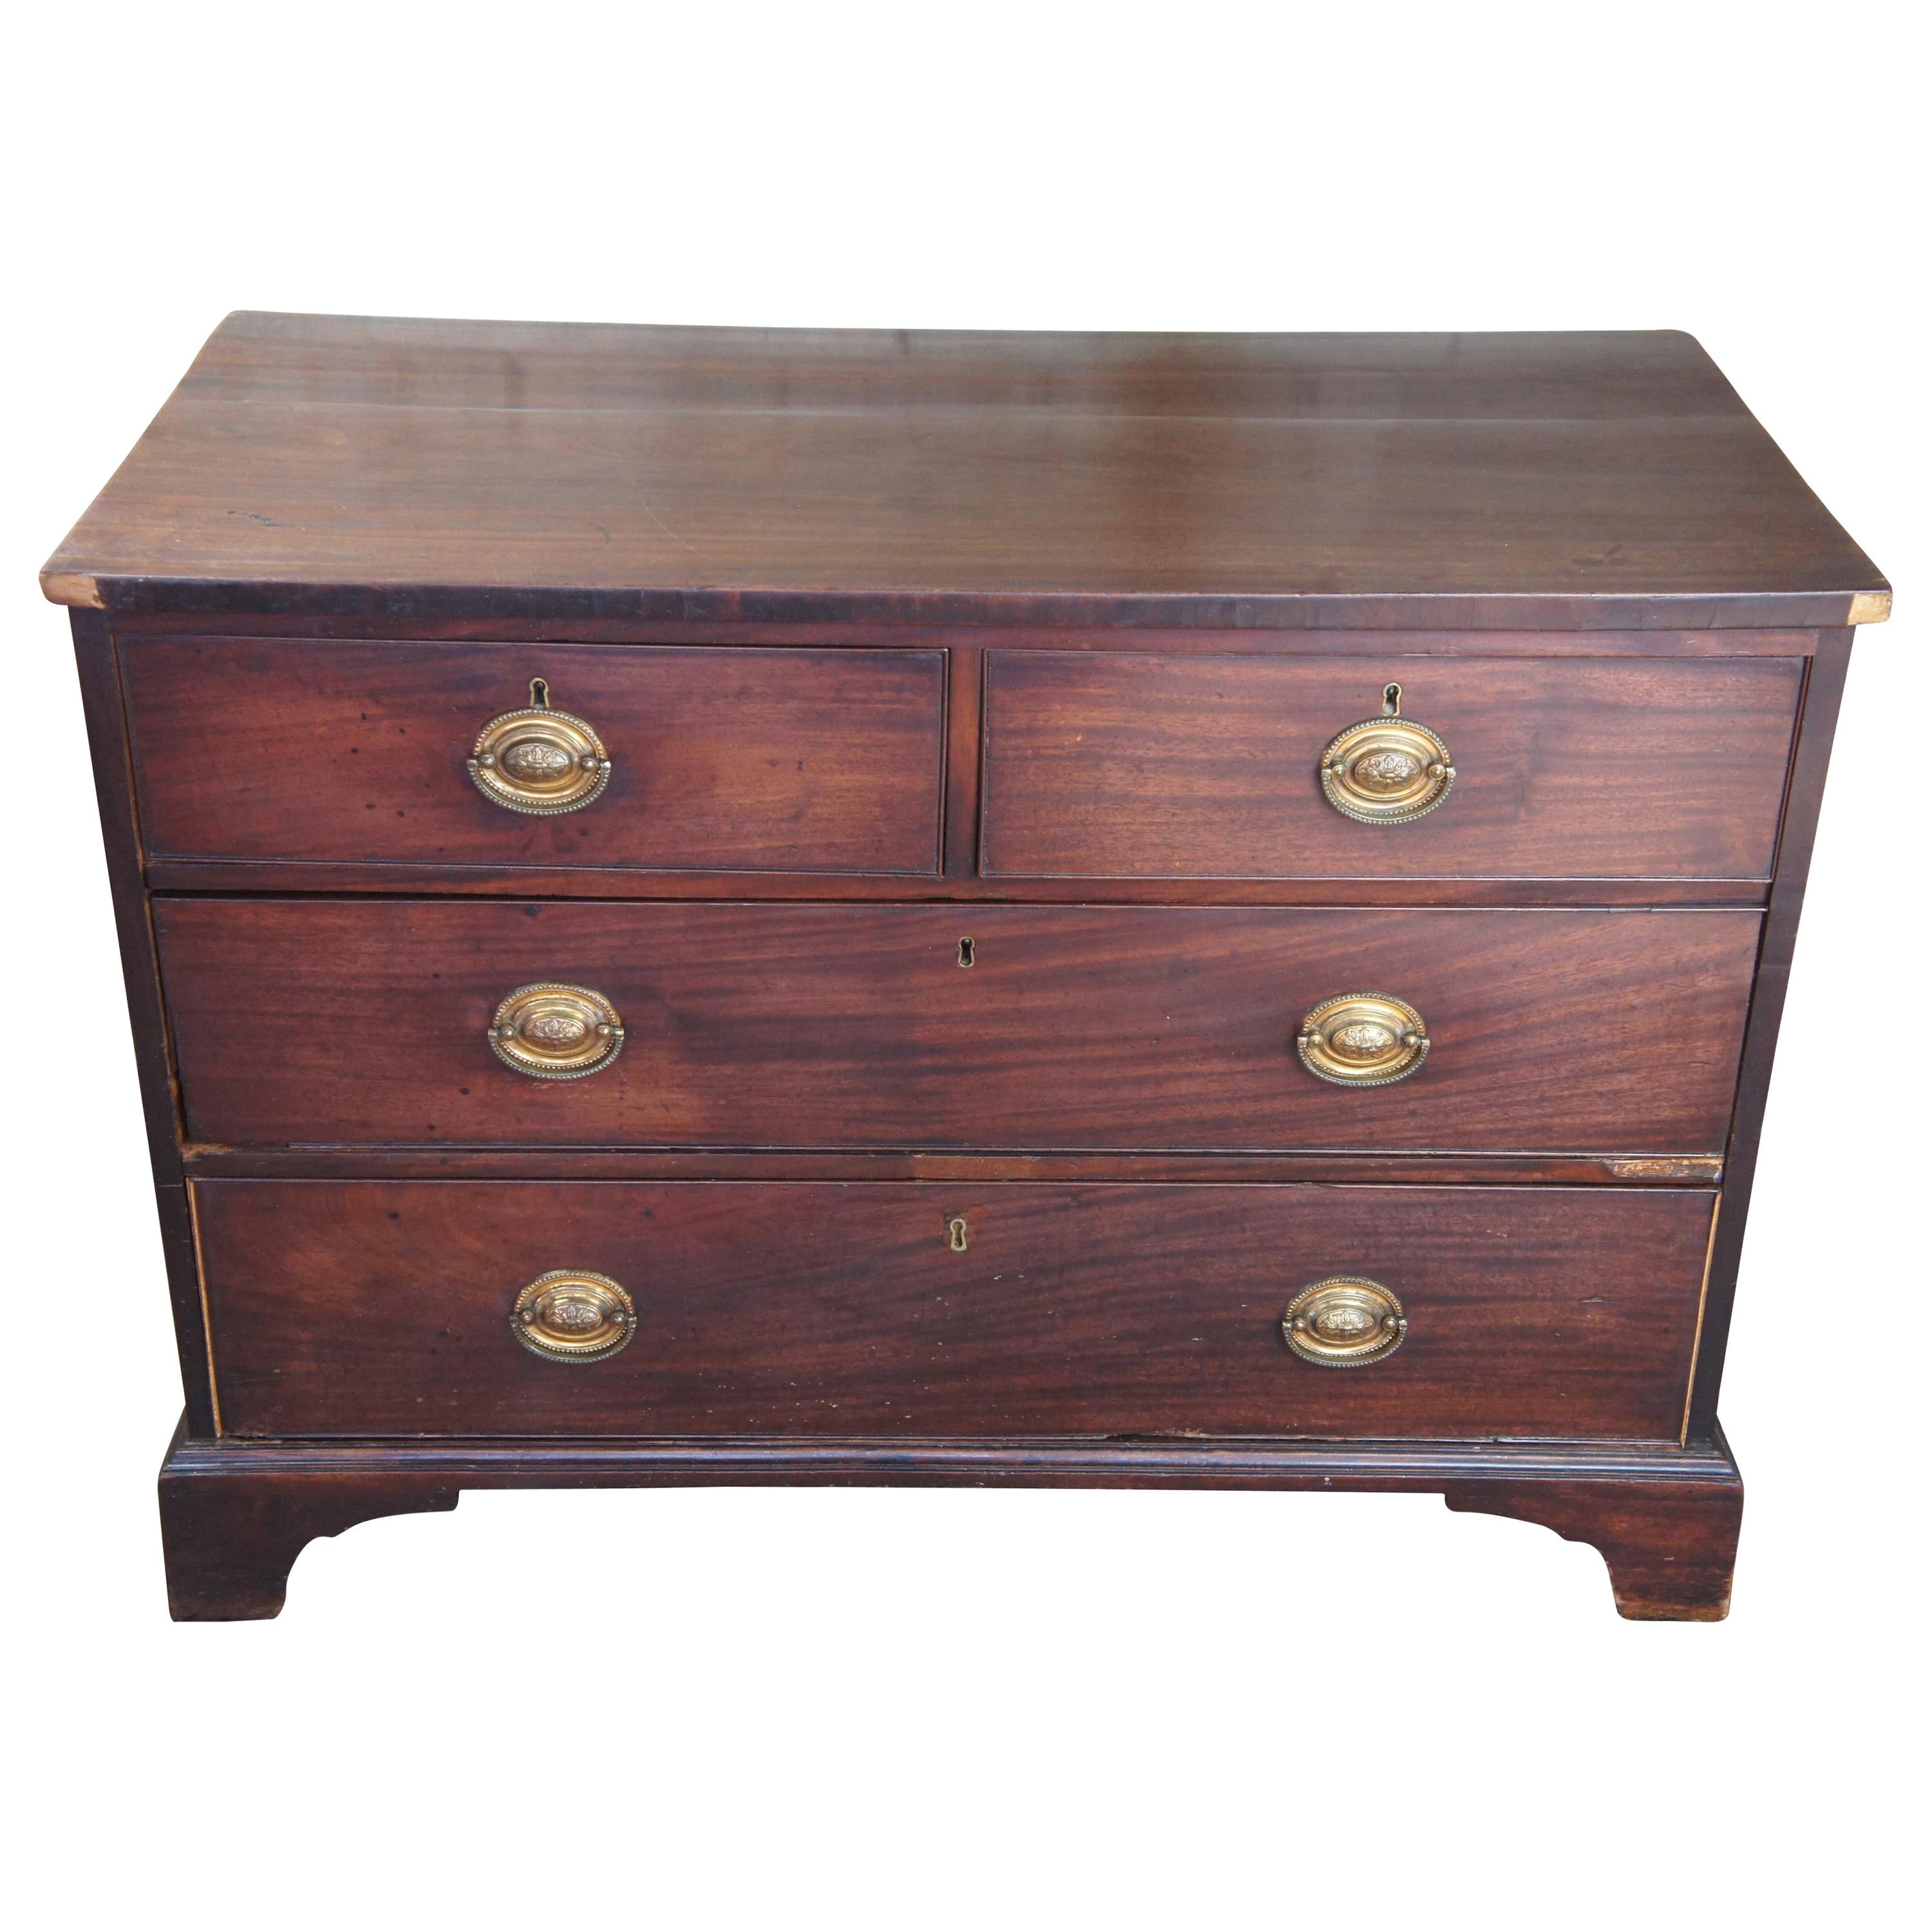 18th Century Mahogany Georgian Chest of Drawers Antique English Dresser For Sale